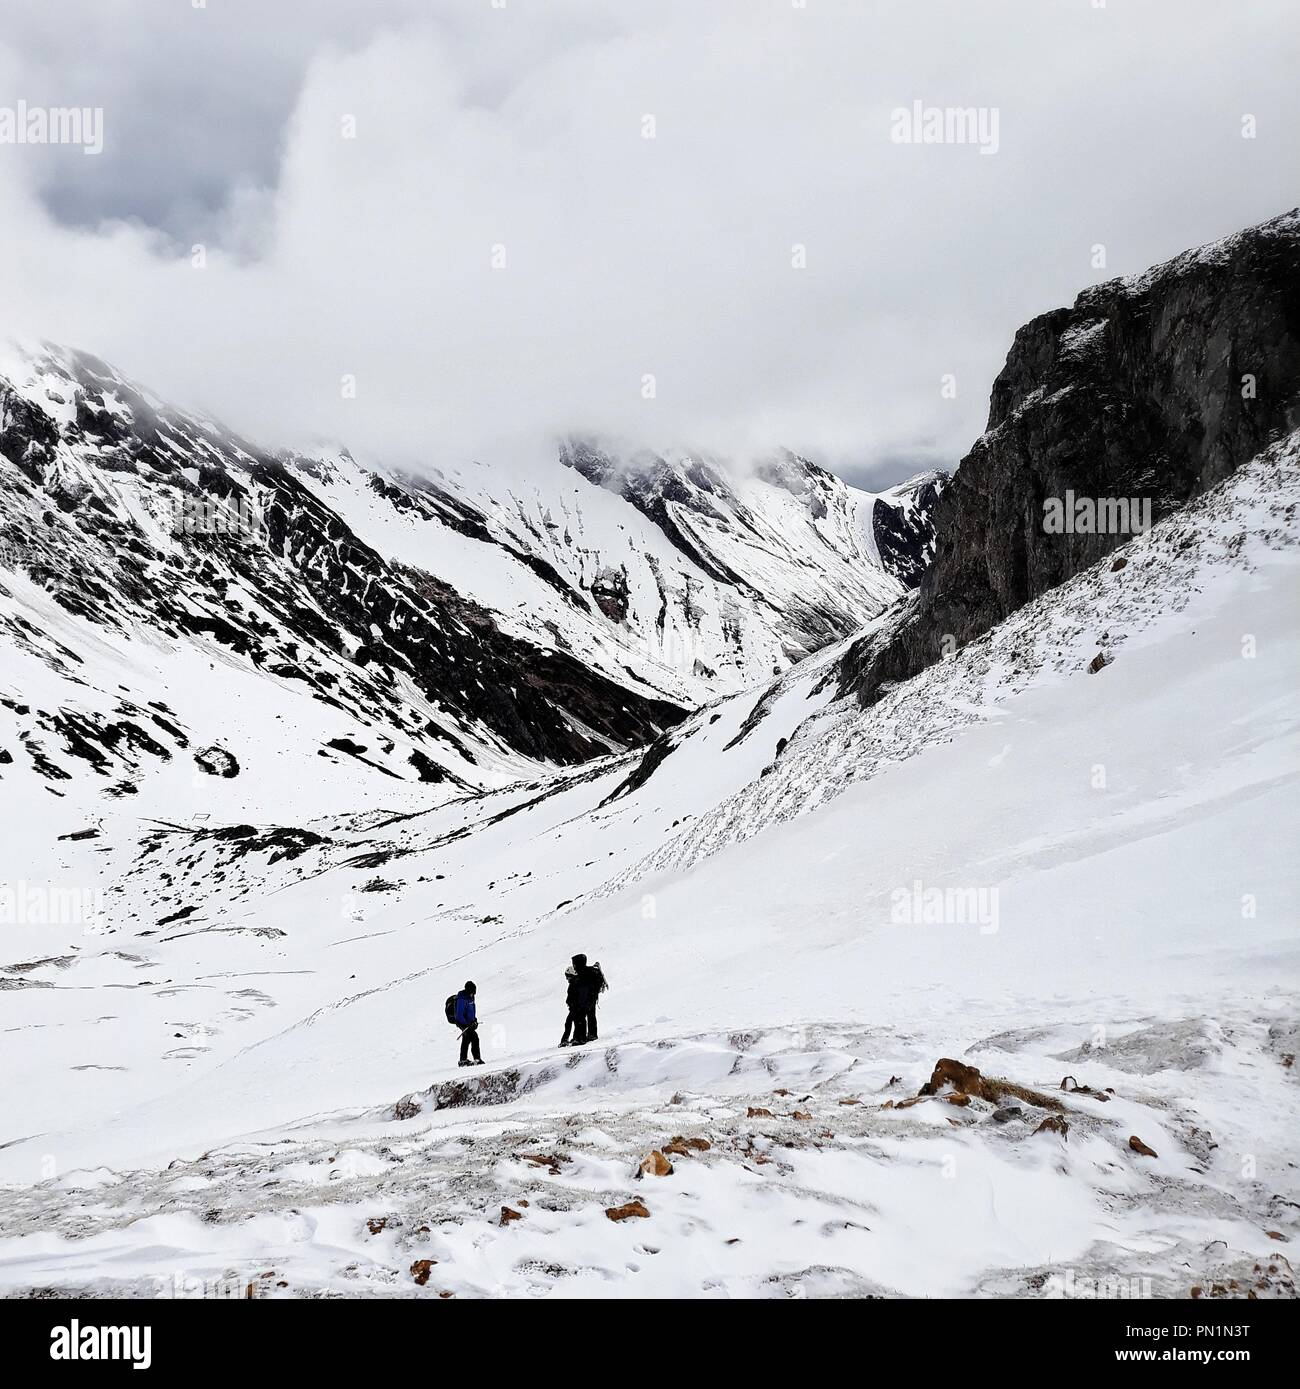 A group of alpinists trek in the snowy mountains. Stock Photo